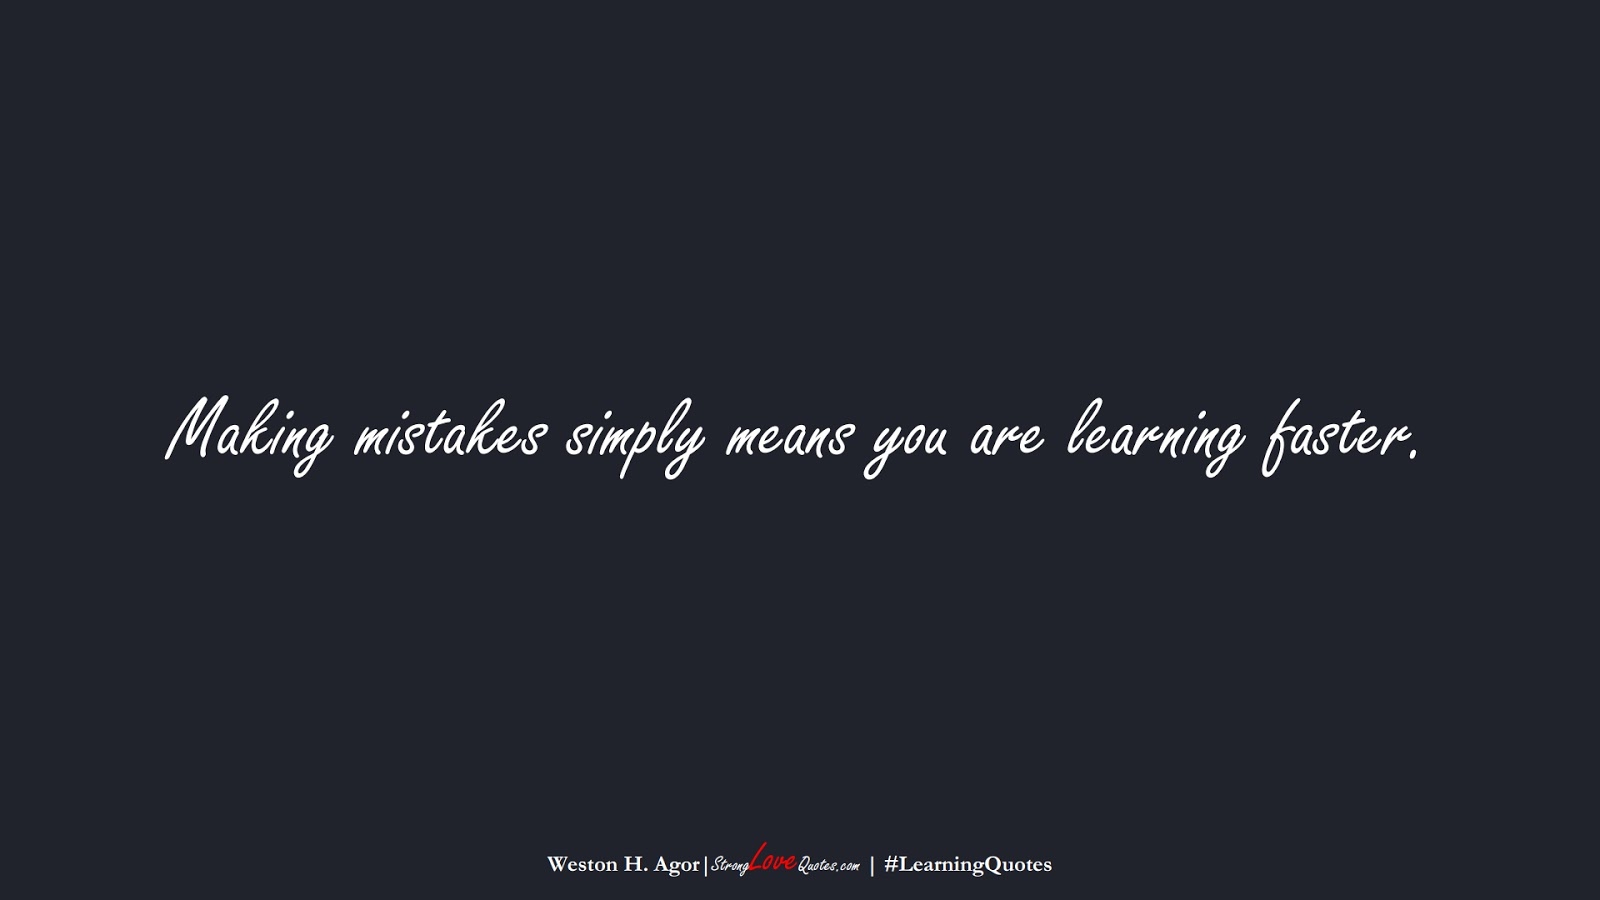 Making mistakes simply means you are learning faster. (Weston H. Agor);  #LearningQuotes